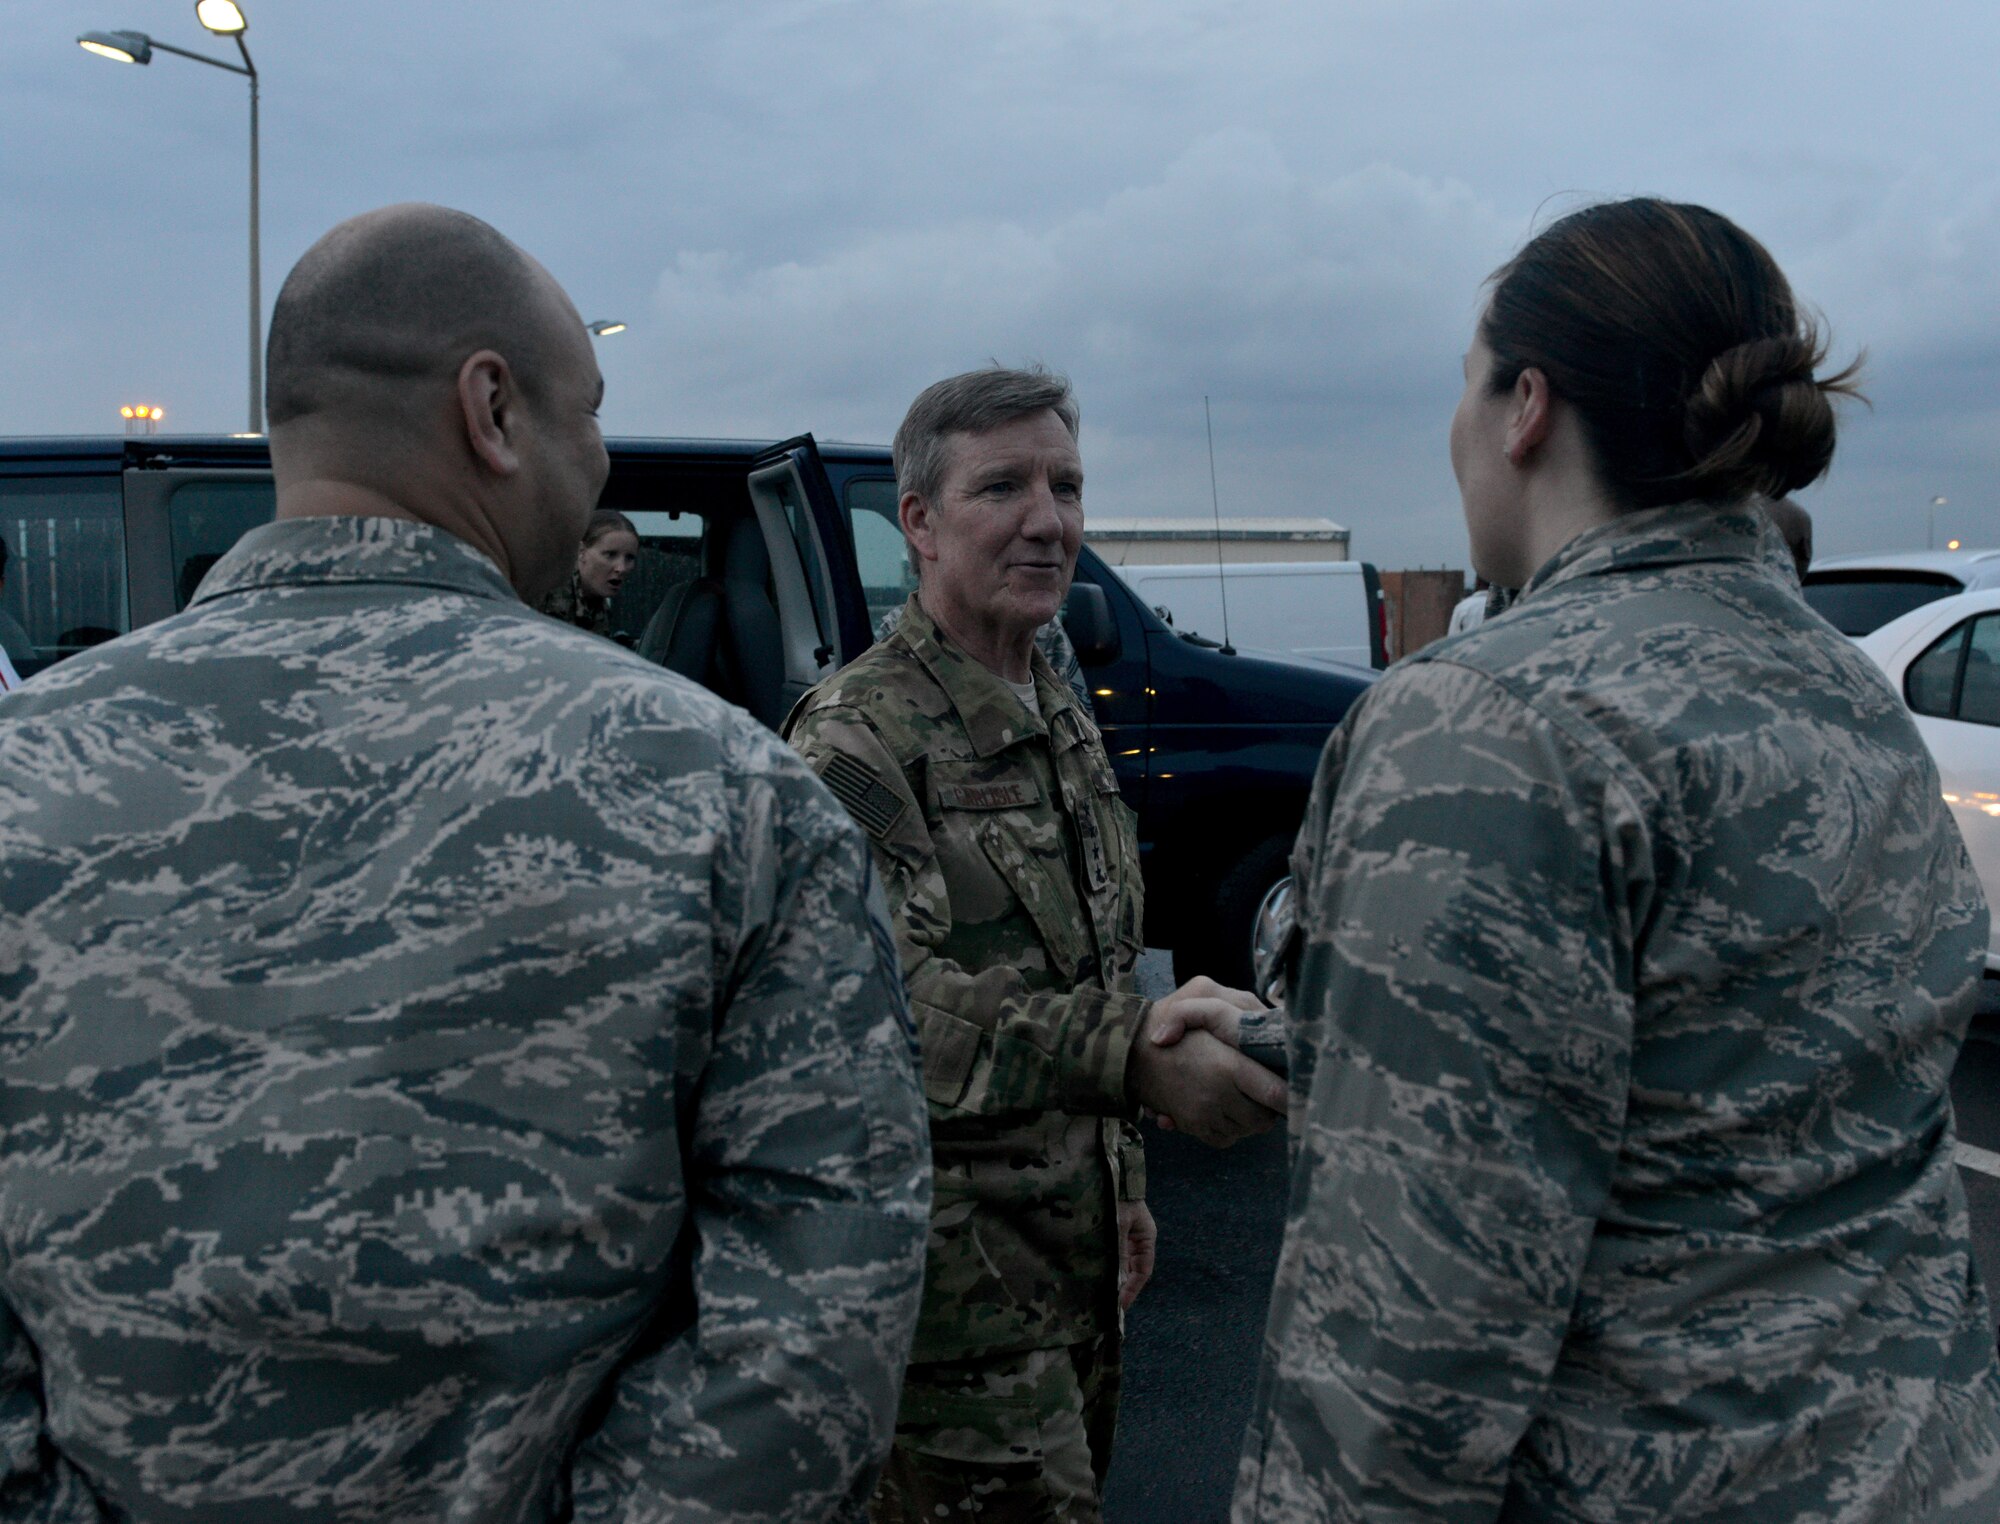 U.S. Air Force Gen. Hawk Carlisle, commander of Air Combat Command, visits with service members staying at Patriot Village during a base visit Oct. 22, 2015, at Incirlik Air Base, Turkey. Patriot Village houses both U.S. and NATO Service members that are deployed to Incirlik AB. (U.S. Air Force photo by Senior Airman Michael Battles/Released)